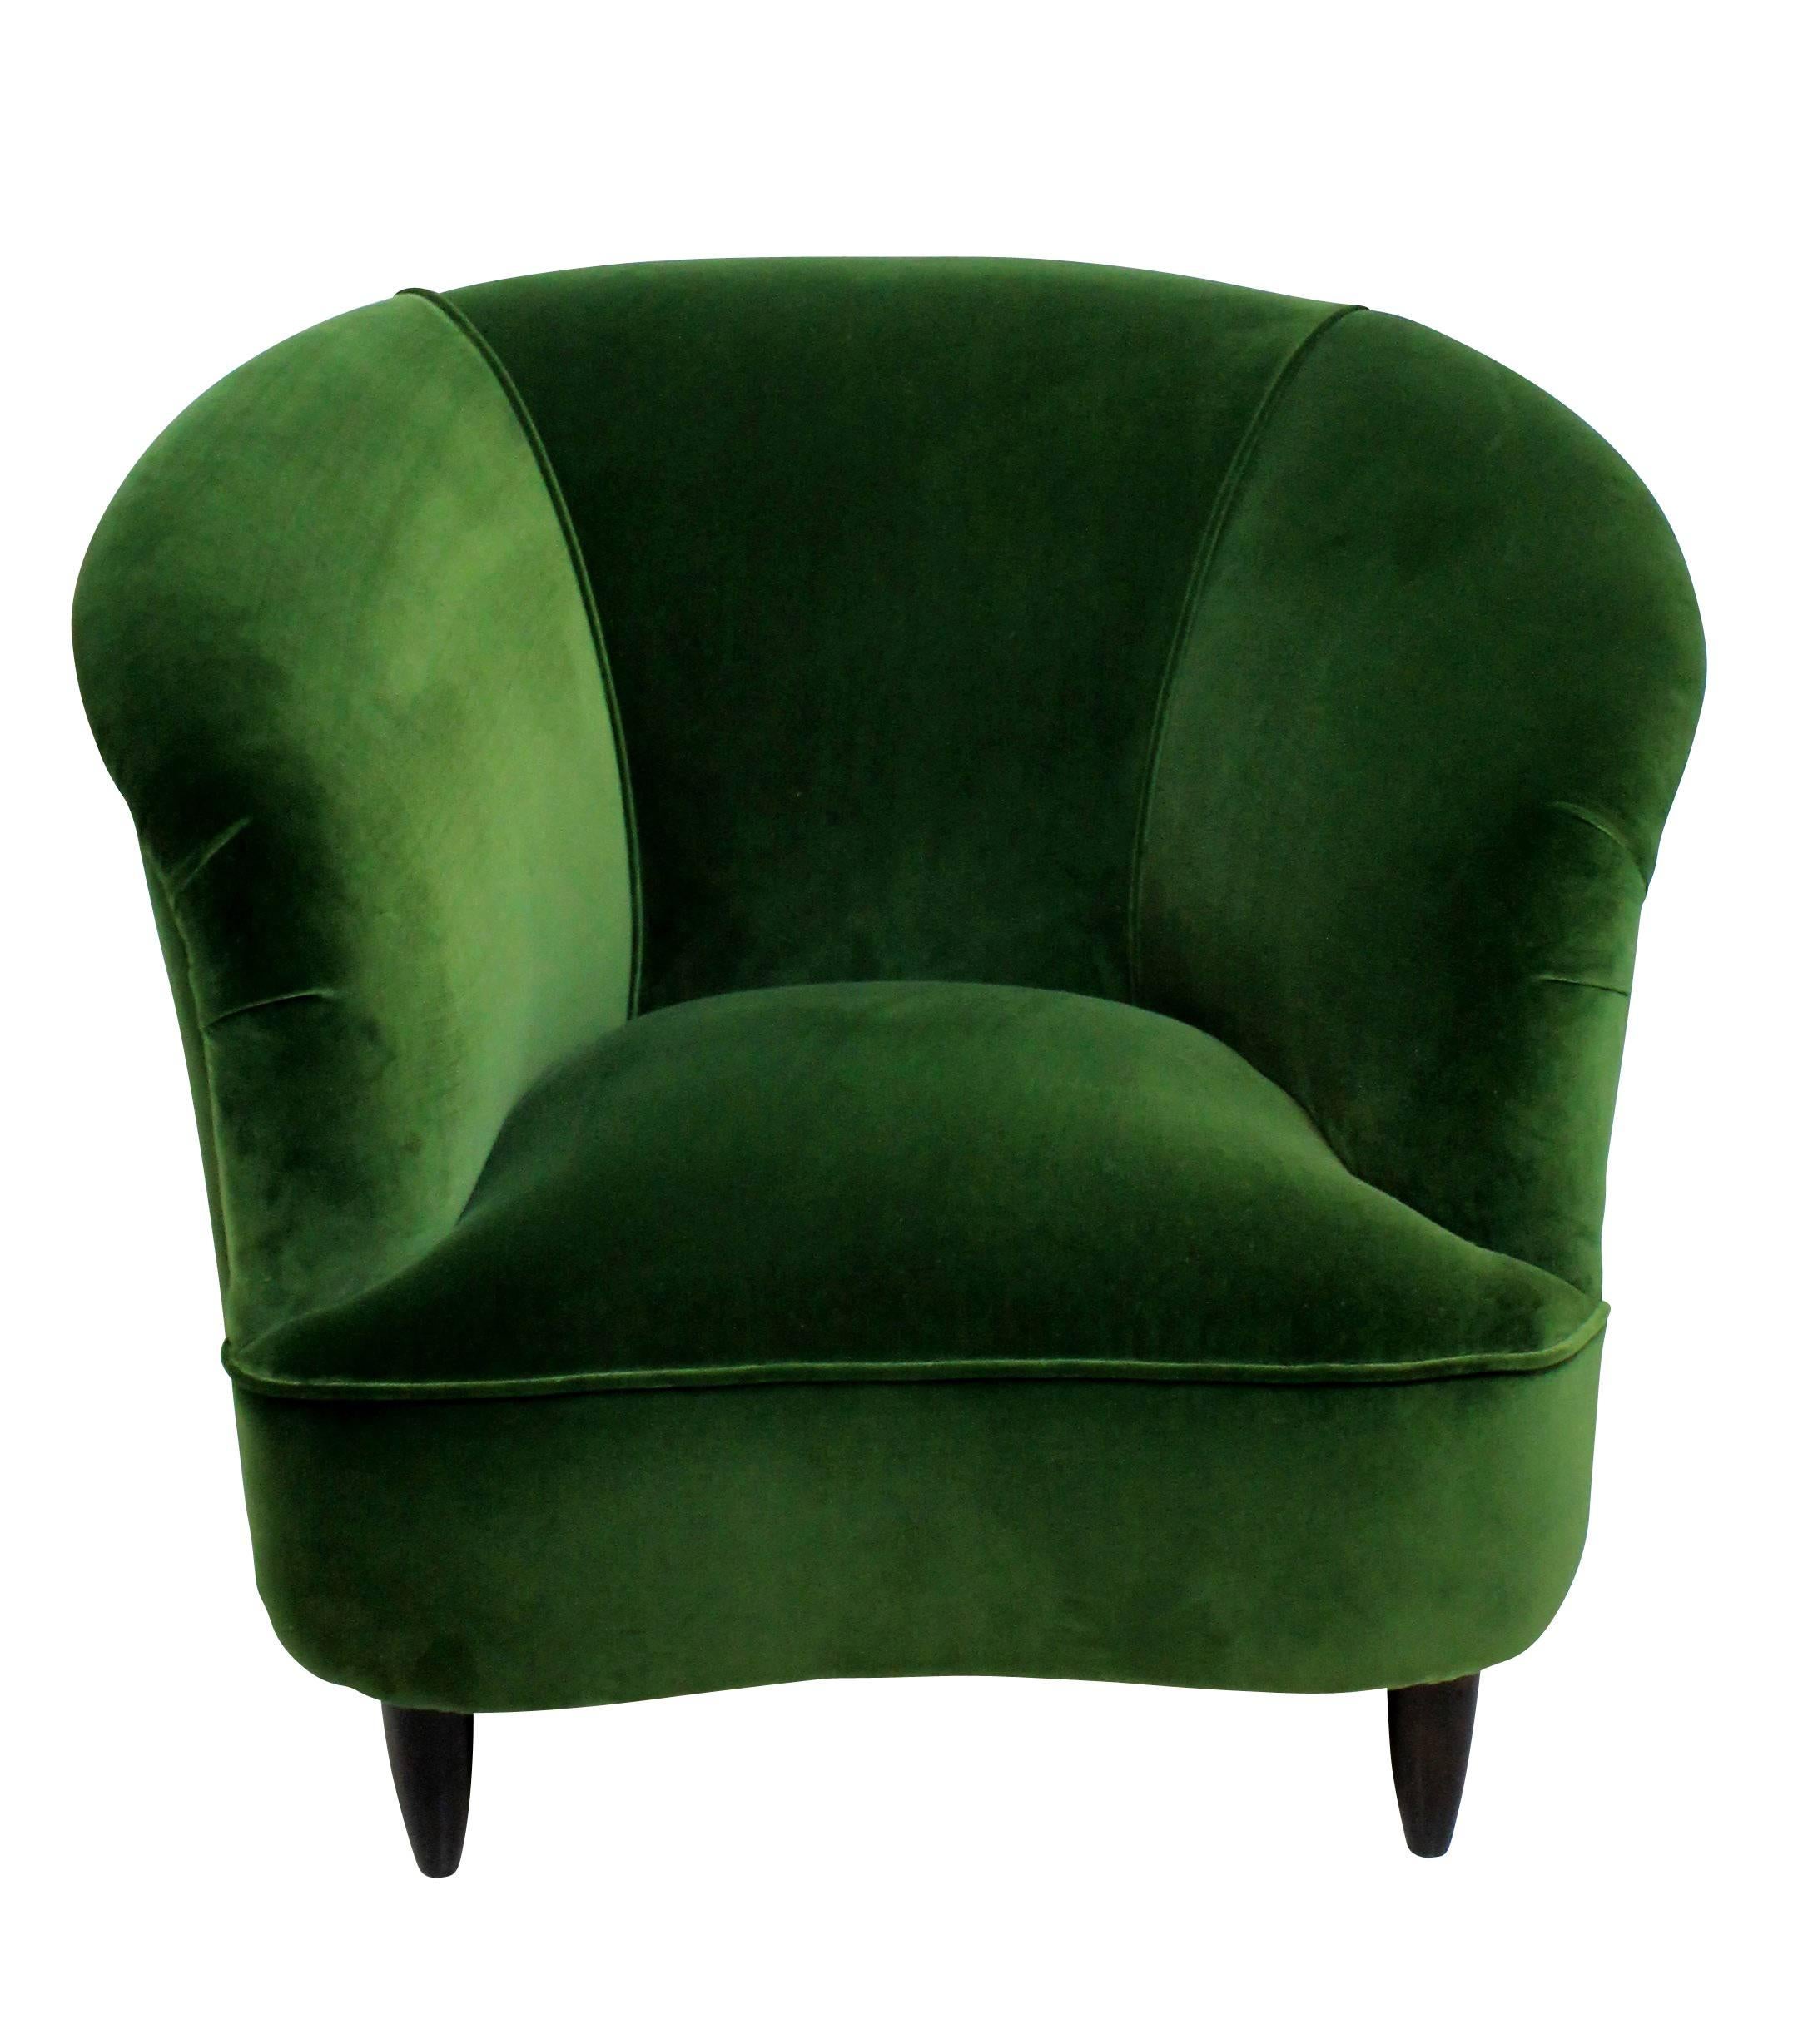 A pair of large Italian sculptural lounge chairs by Parisi. On turned French polished legs seen here in Emerald green velvet for illustration purposes and can be upholstered in a fabric of your choice.
   